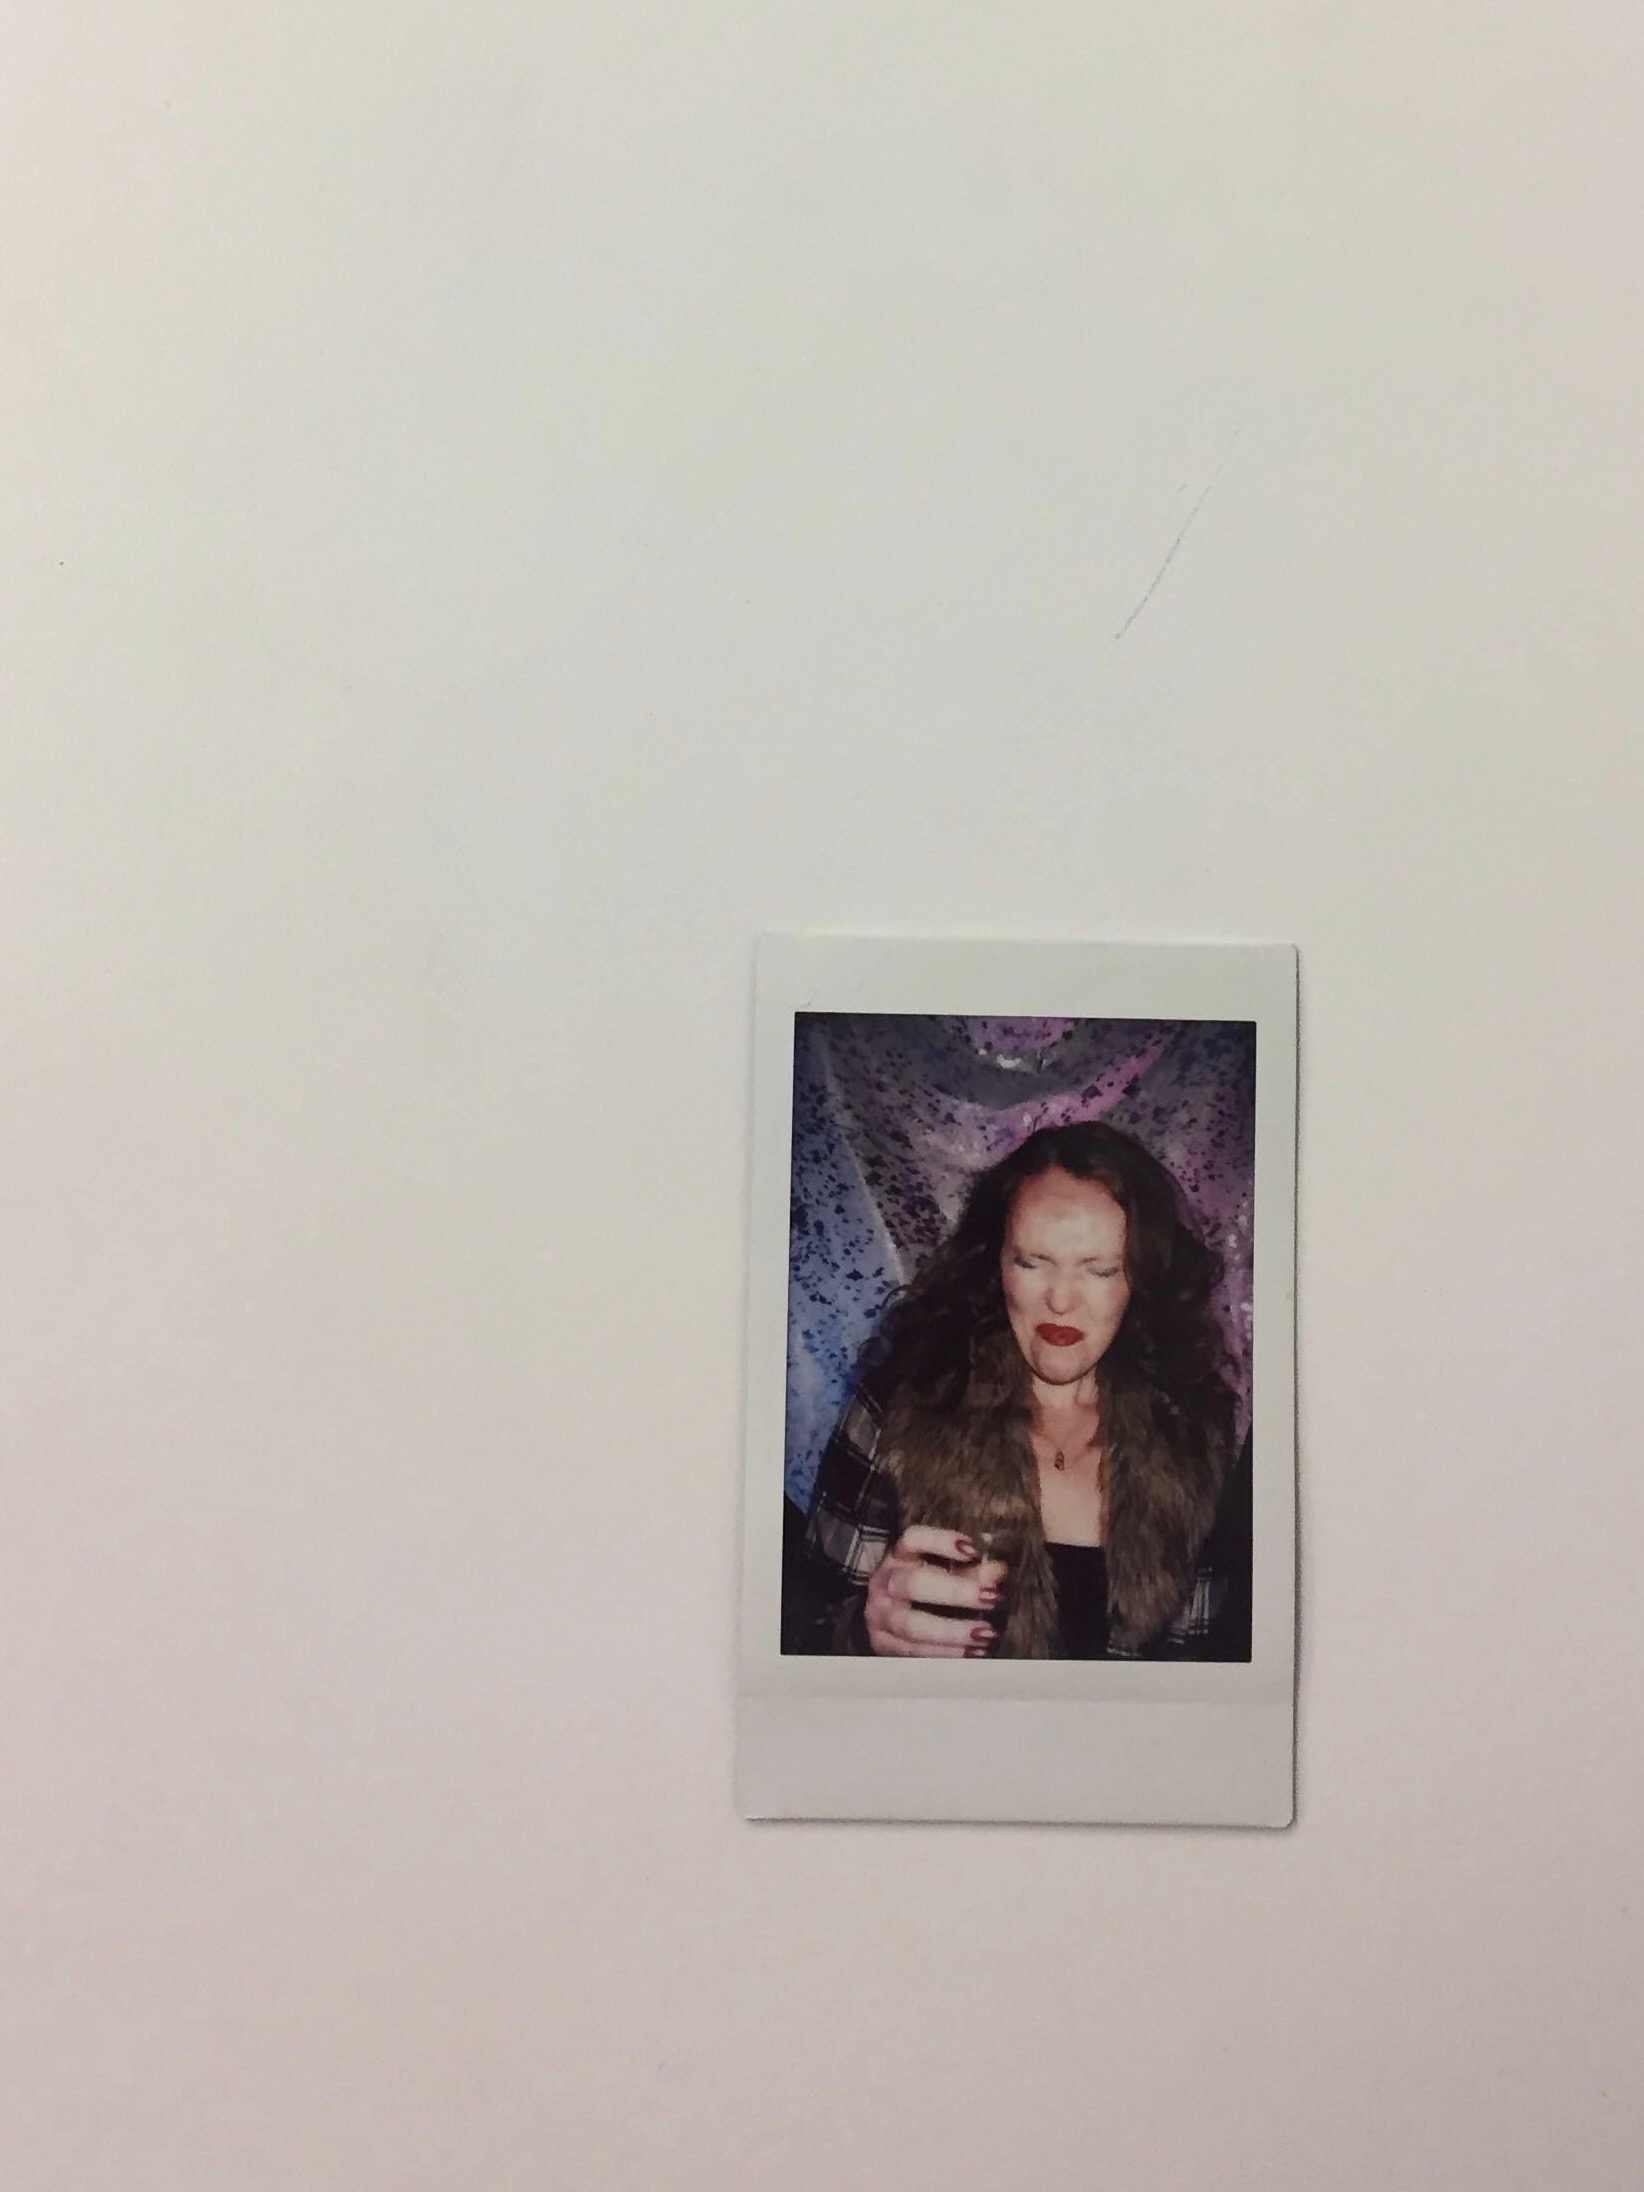 A polaroid of a young woman cringing after taking a shot of liquor. 